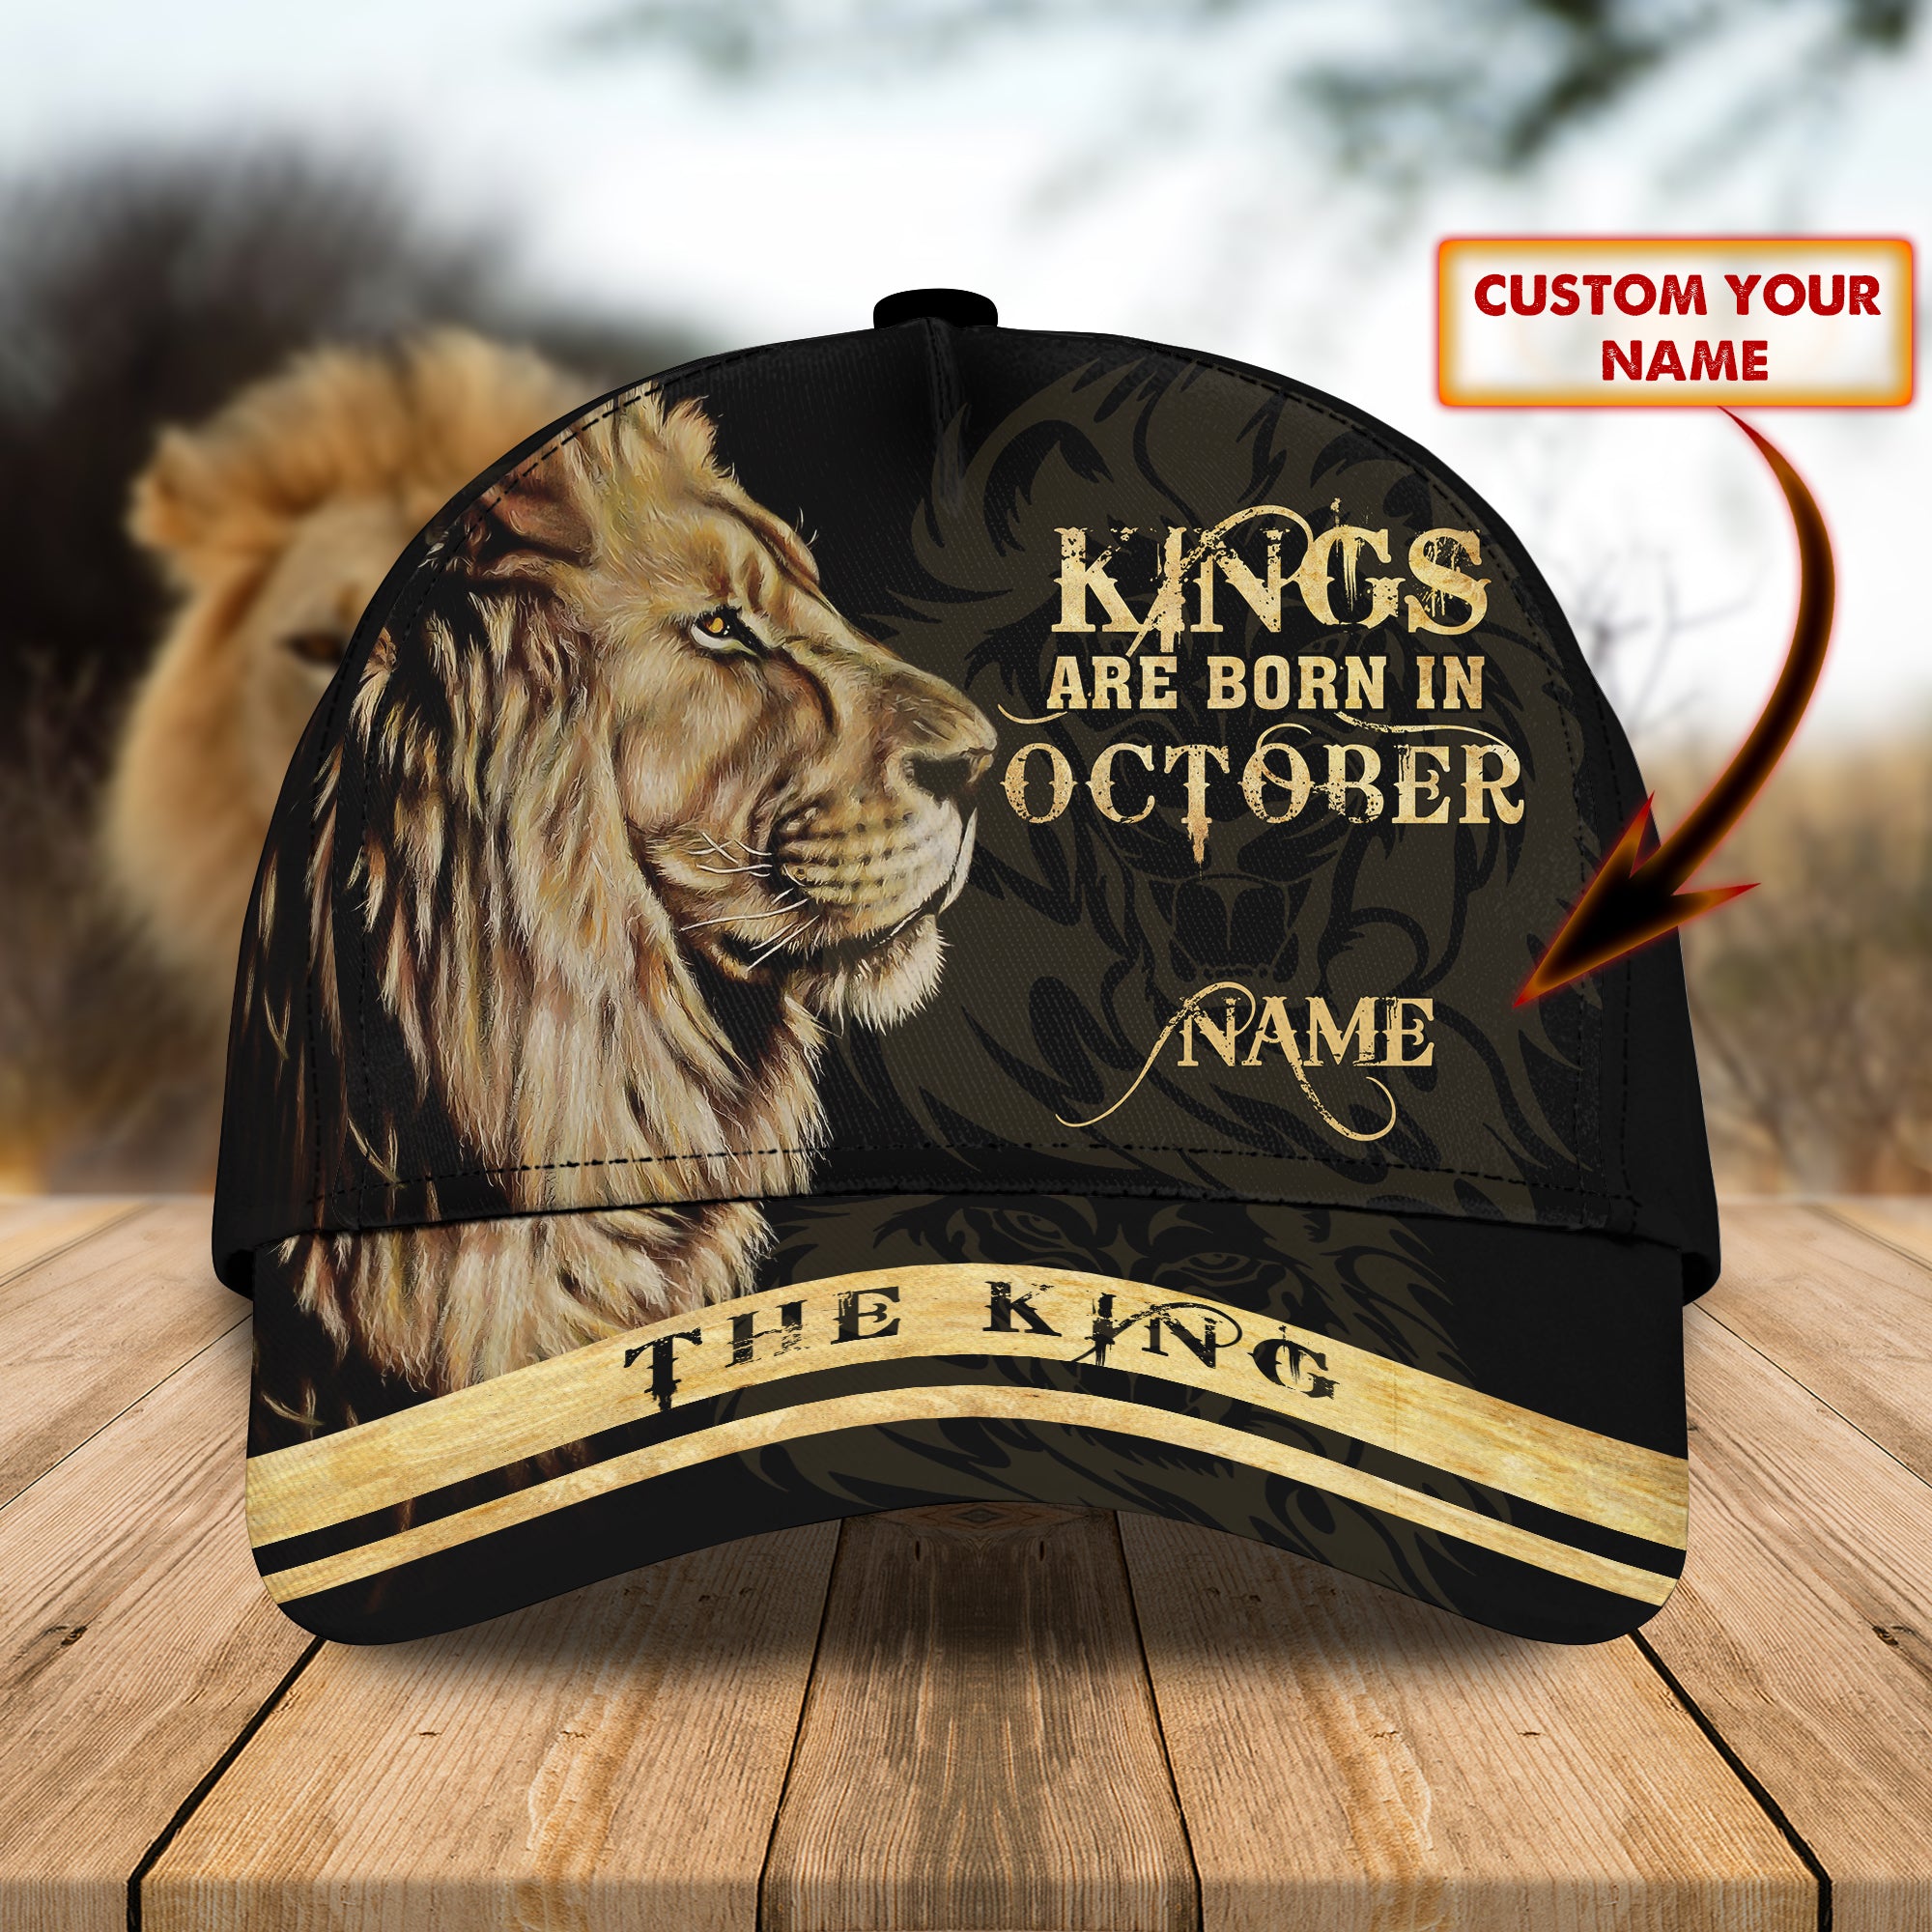 Kings Are Born In October- Personalized Name Cap 21 - Bhn97